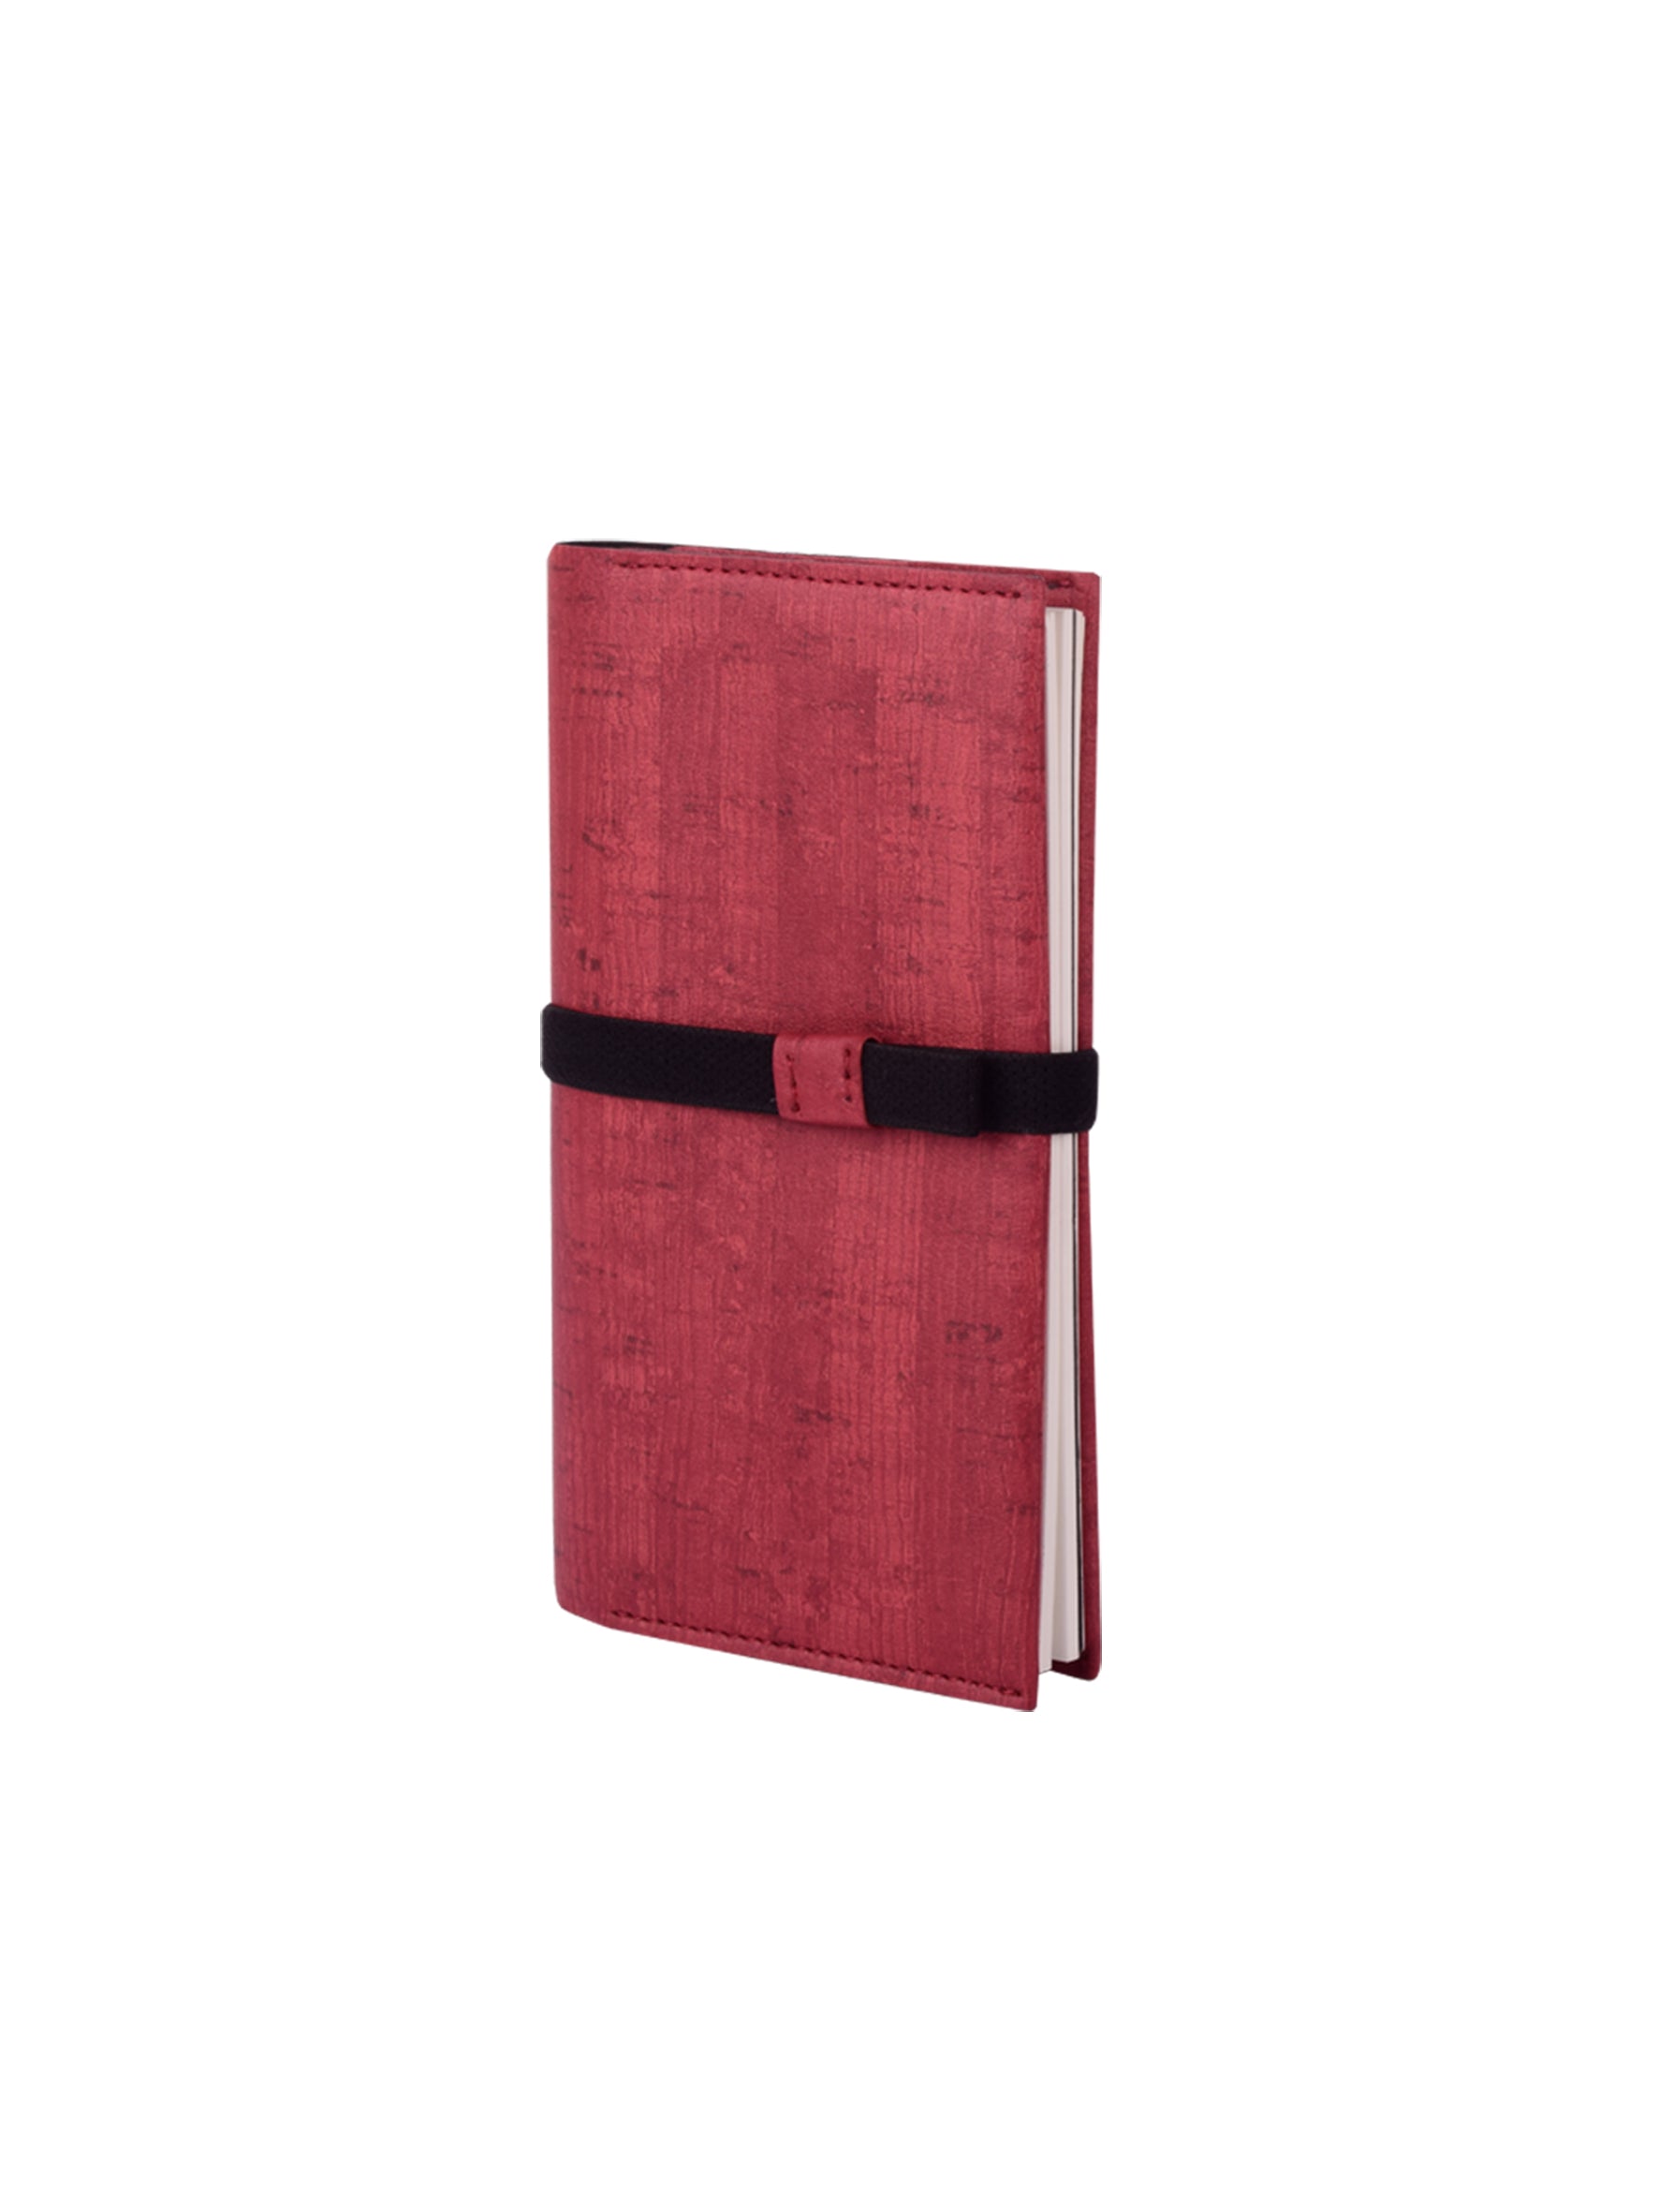 DOODLE Clarion Red Executive Notebook Diary